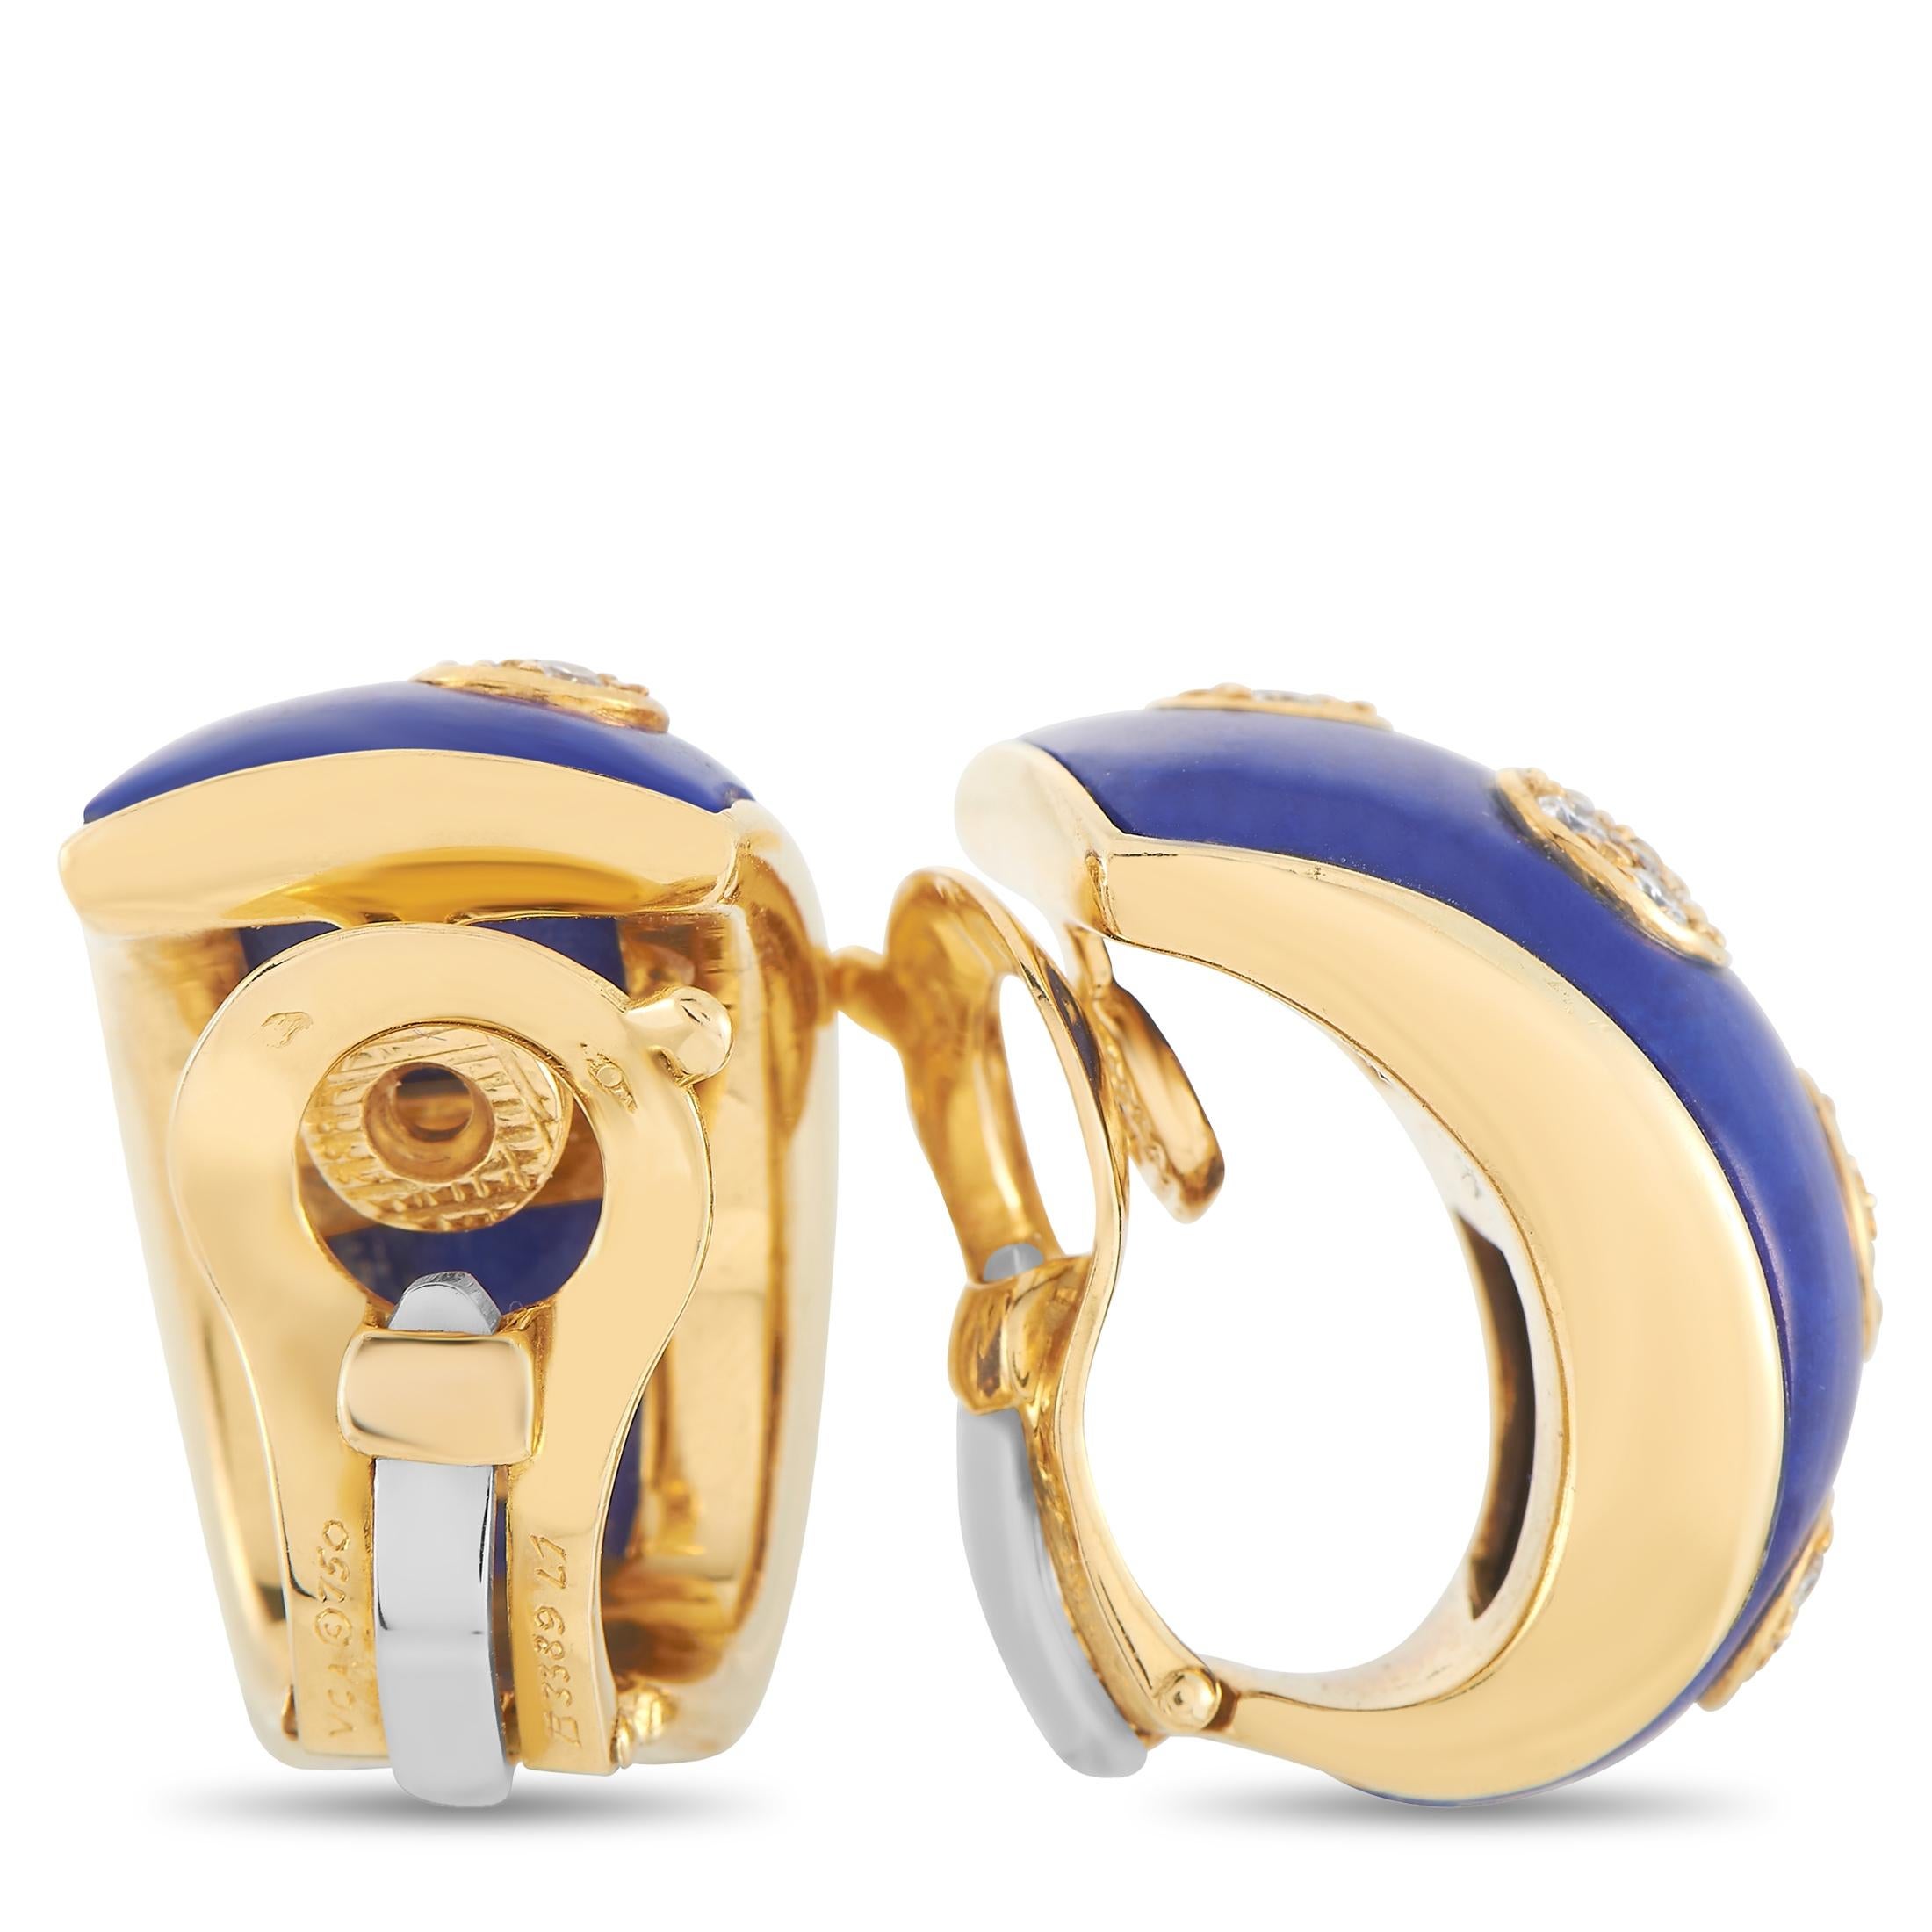 This precious pair of vintage Van Cleef & Arpels 18K Yellow Gold 0.60 ct Diamond Enamel Huggie Clip-on Earrings is fashioned from 18K yellow gold. The wide huggie clip-on hoops have a blue enamel face adorned by round diamonds set in a flower motif.